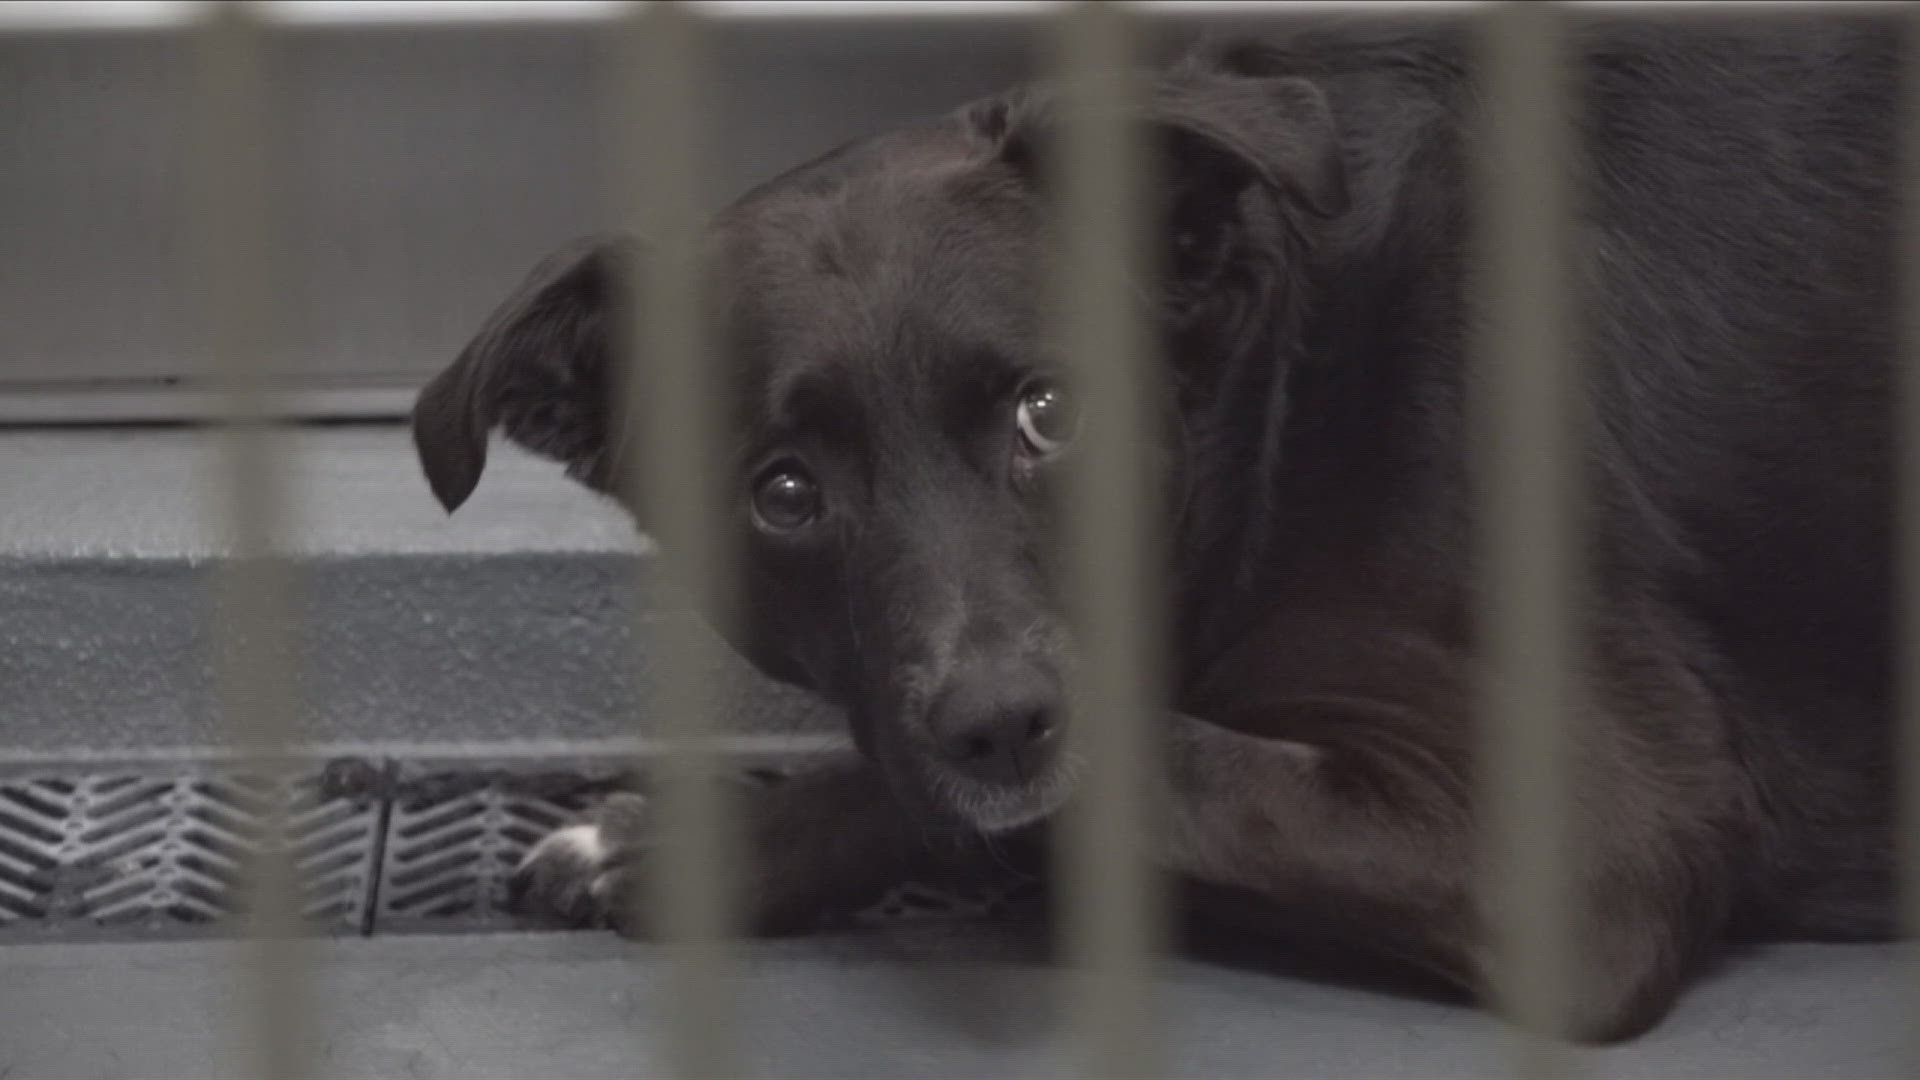 Animal foster parents around Memphis said the euthanization rate at Memphis Animal Services is alarmingly high.